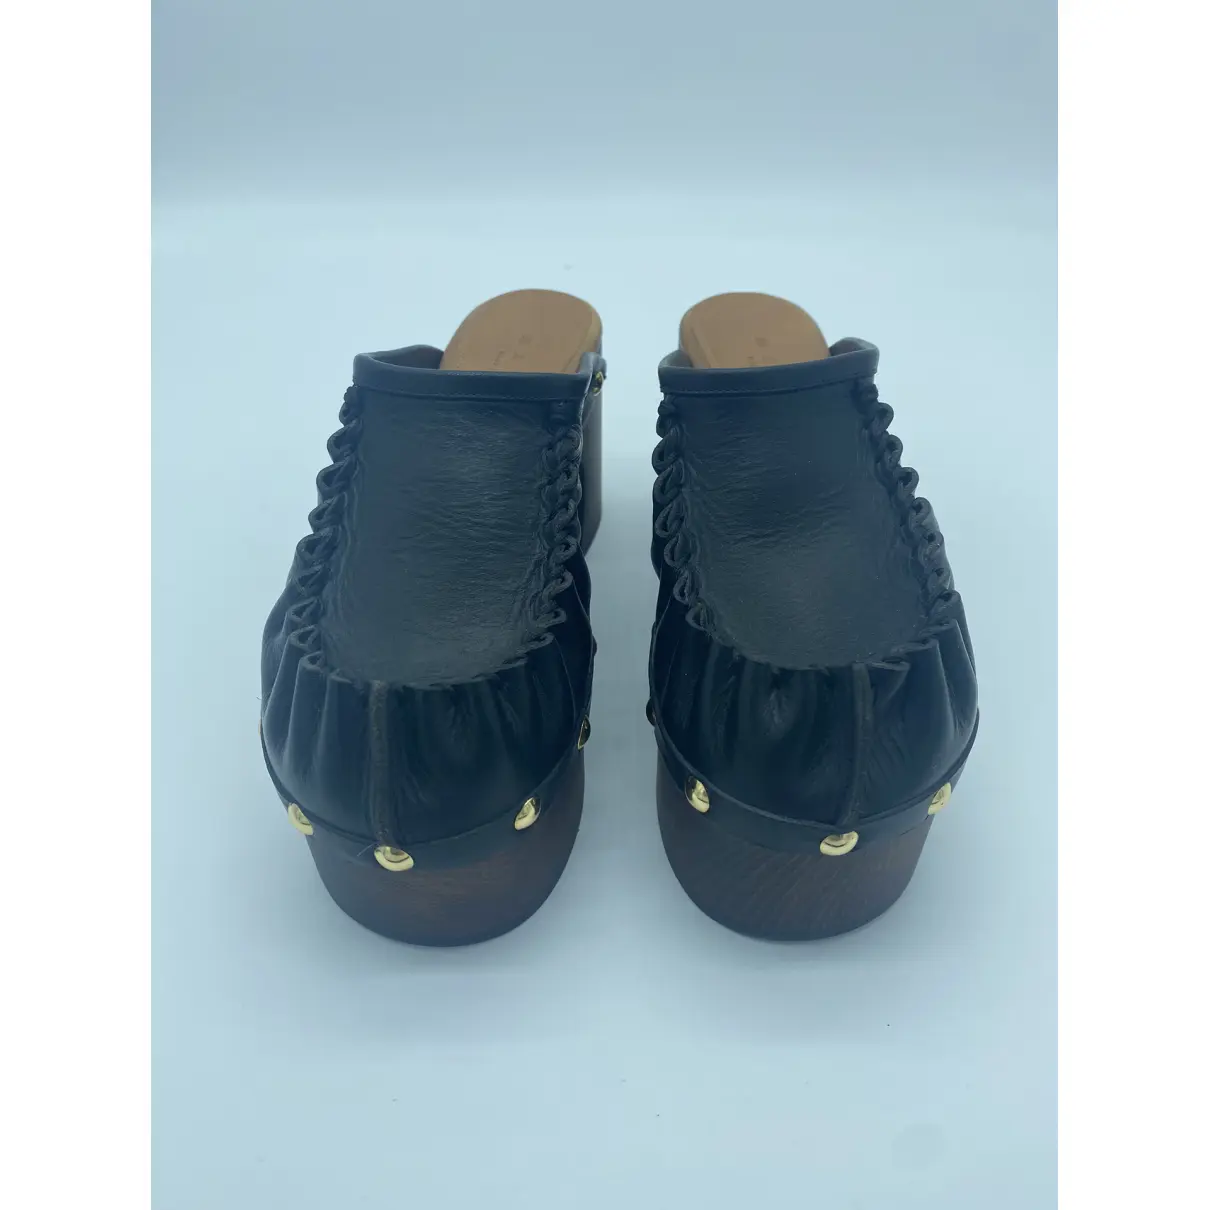 Buy Marni Leather mules & clogs online